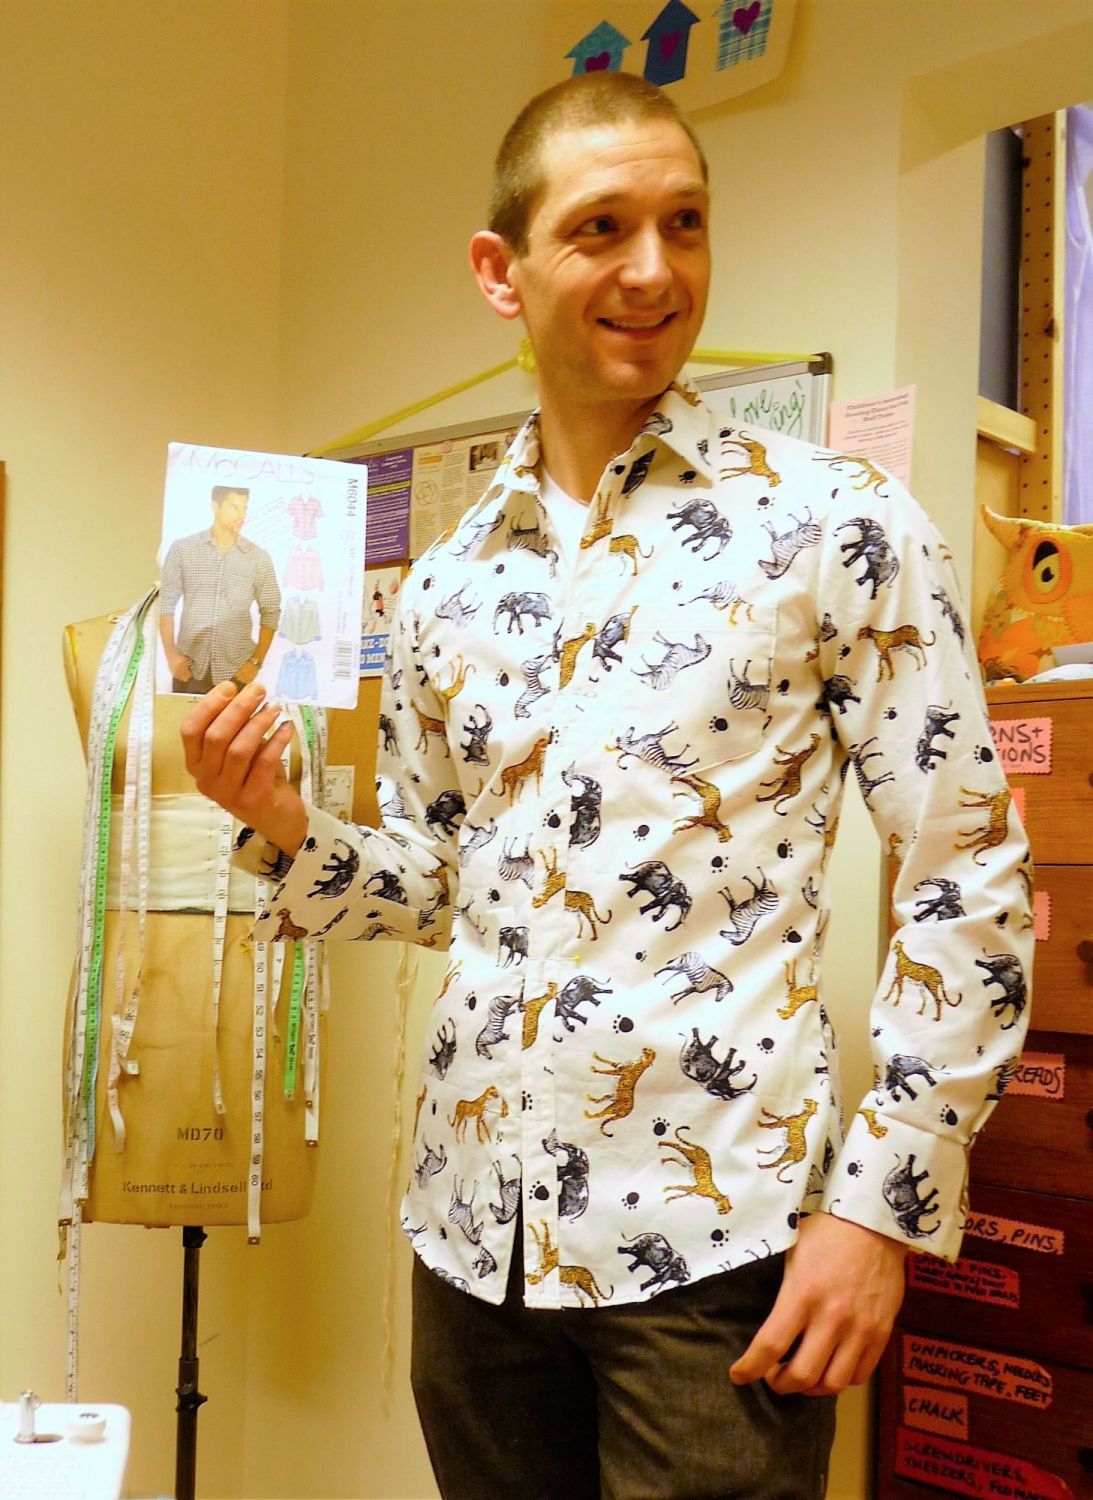 Tony in his completed shirt sewn in classes at Sew In brighton, East Sussex